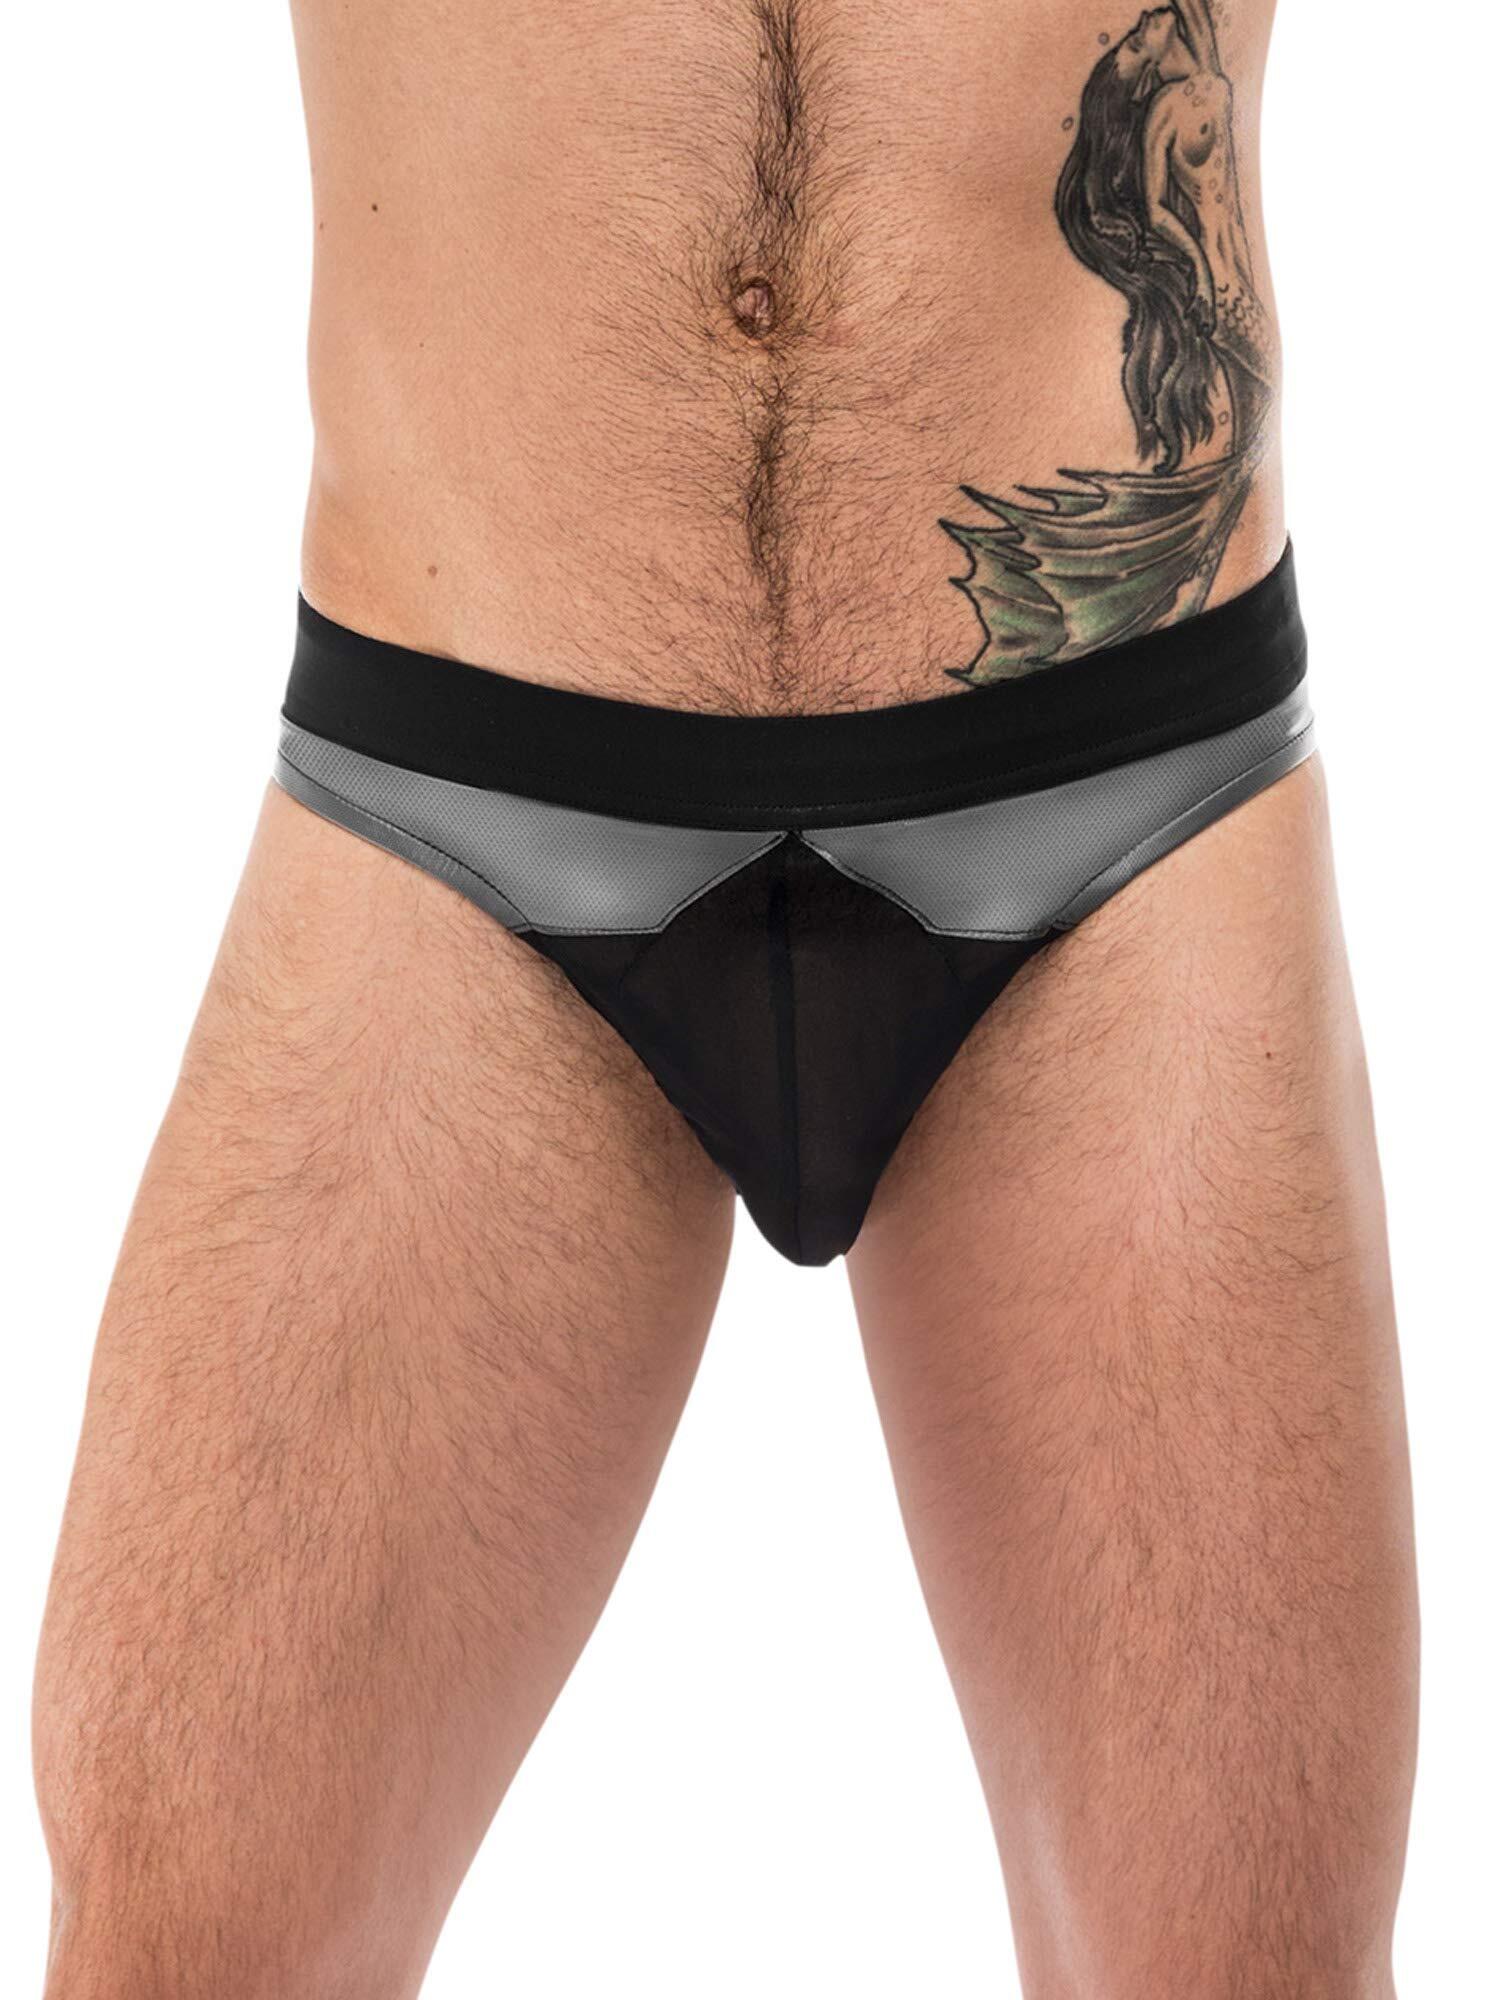 Male Power Thong - Grey - S/M S/M